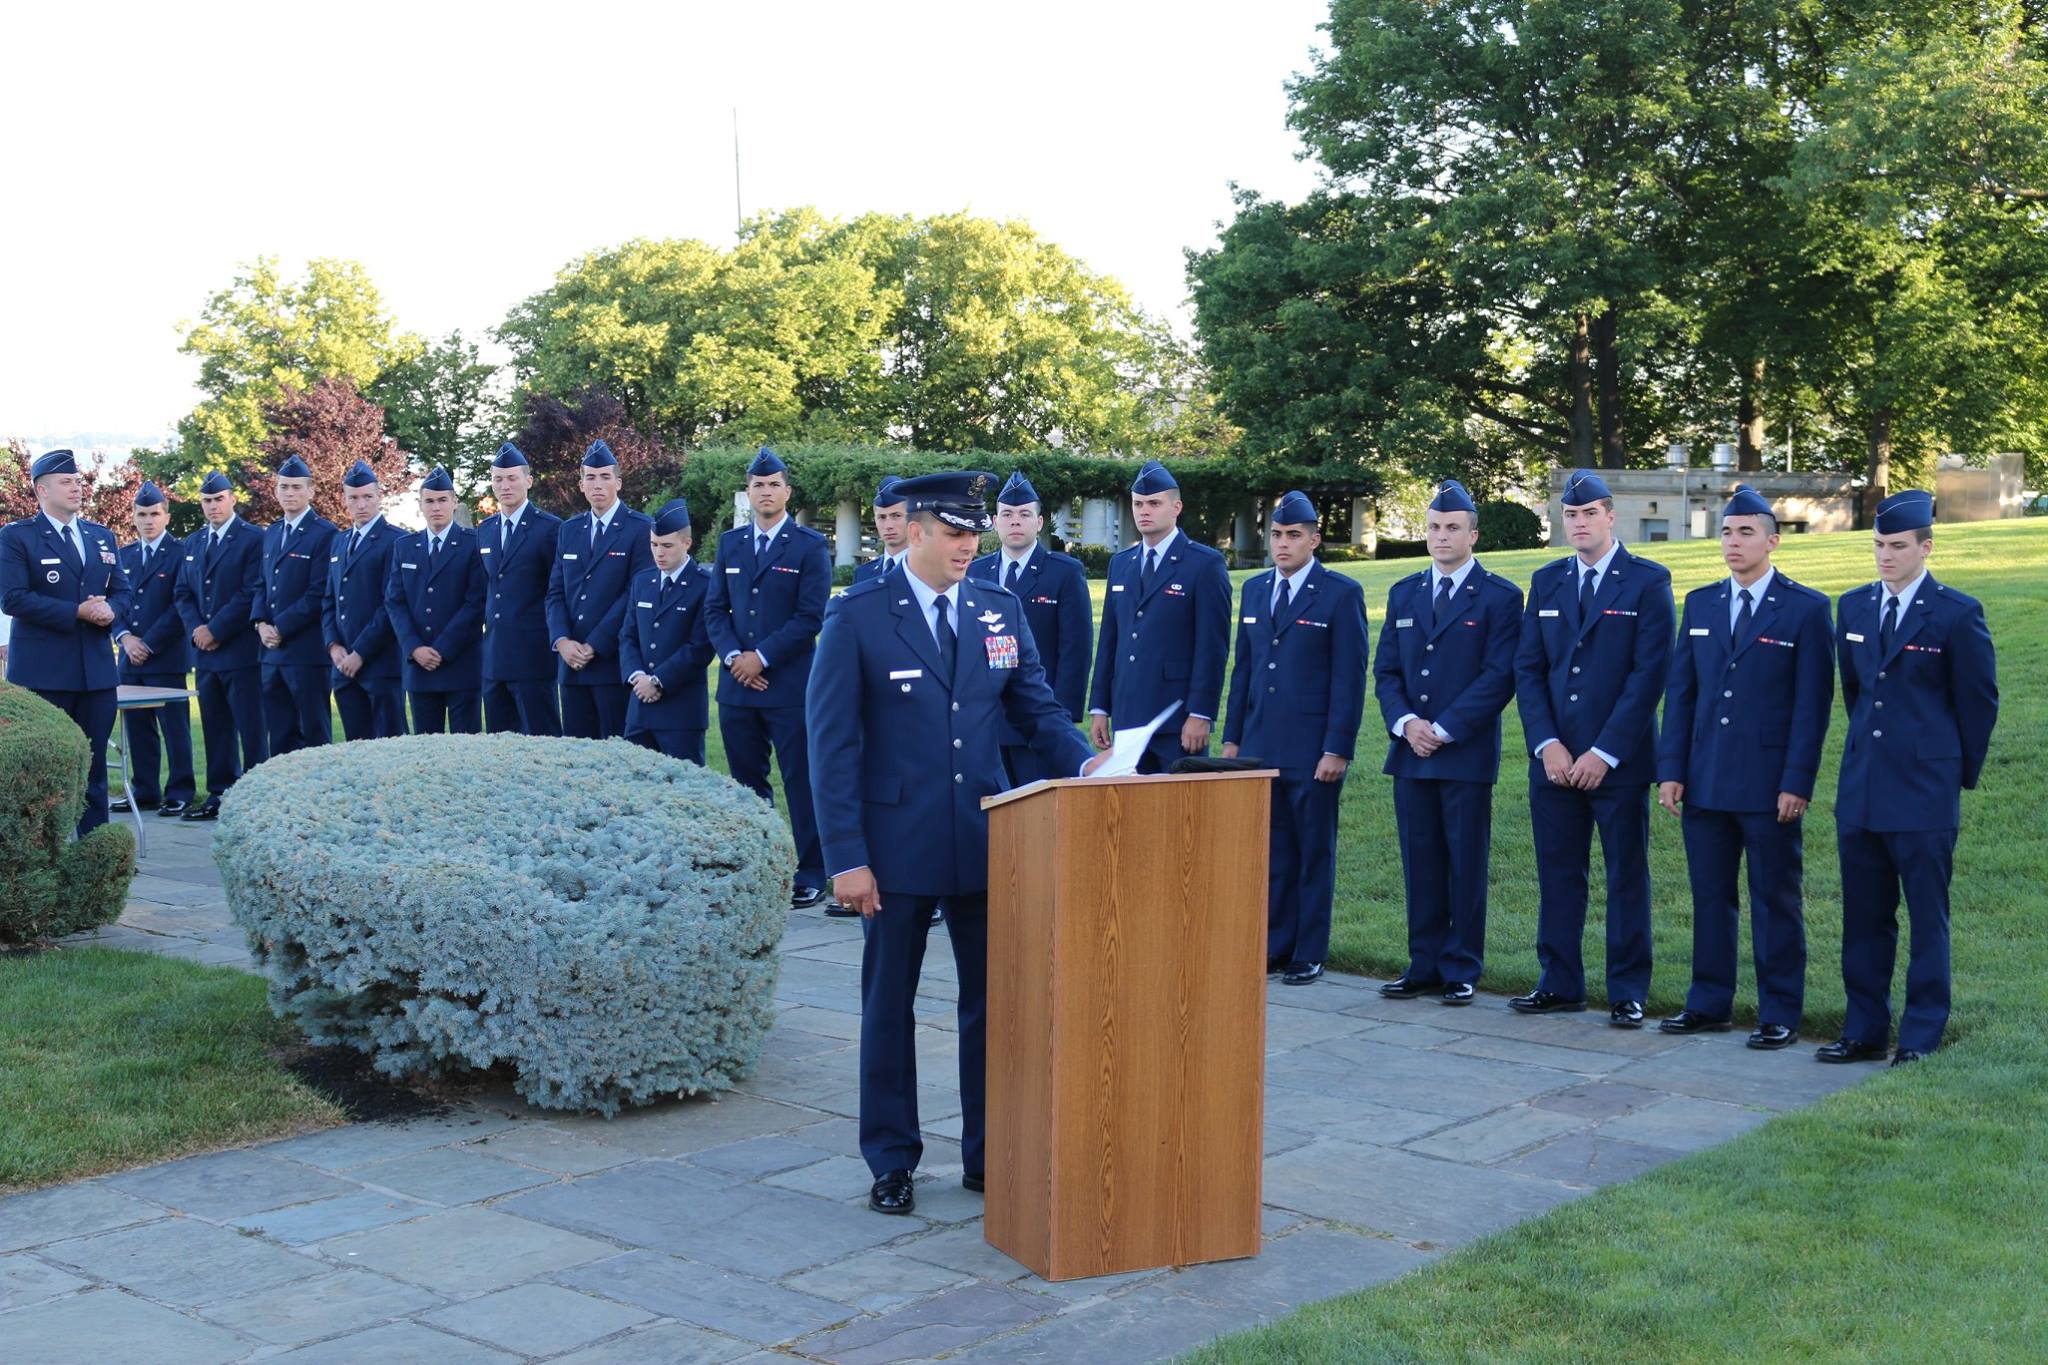 Eighteen midshipmen were commissioned as Officers in the U.S. Air Force